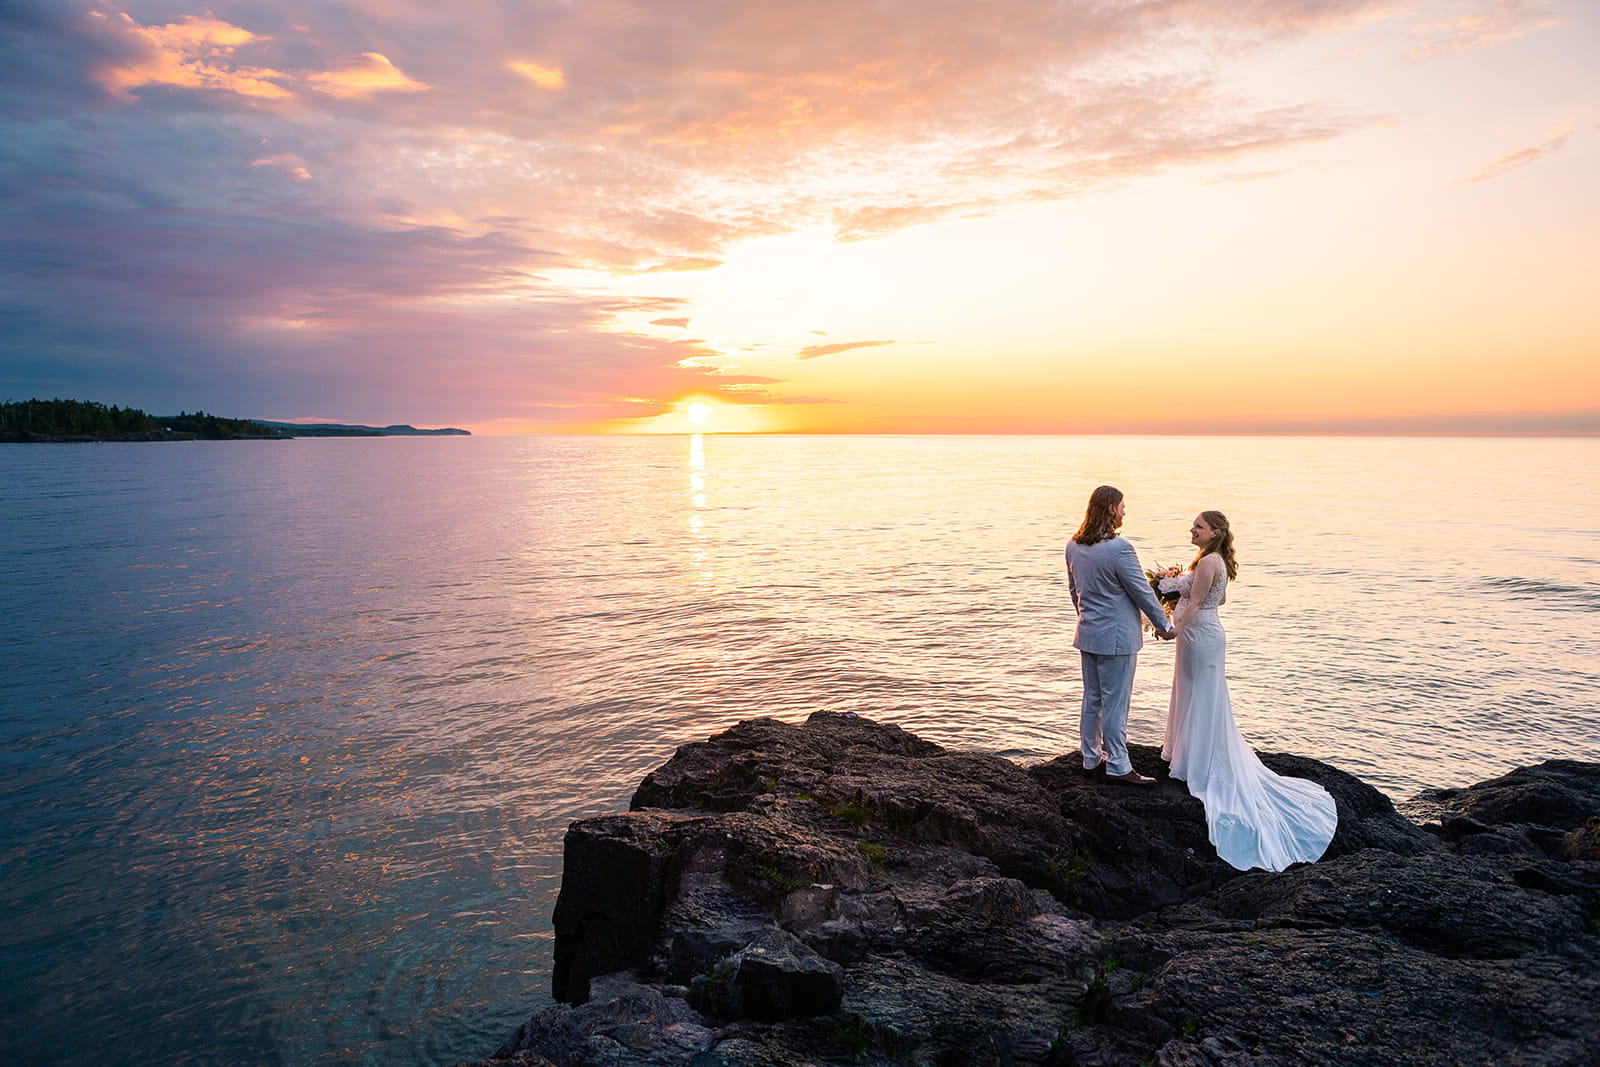 A couple watch the sunrise over Lake Superior during their North Shore elopement in Minnesota. The sun glows golden over the water as they watch from a rocky outcropping on the shore.